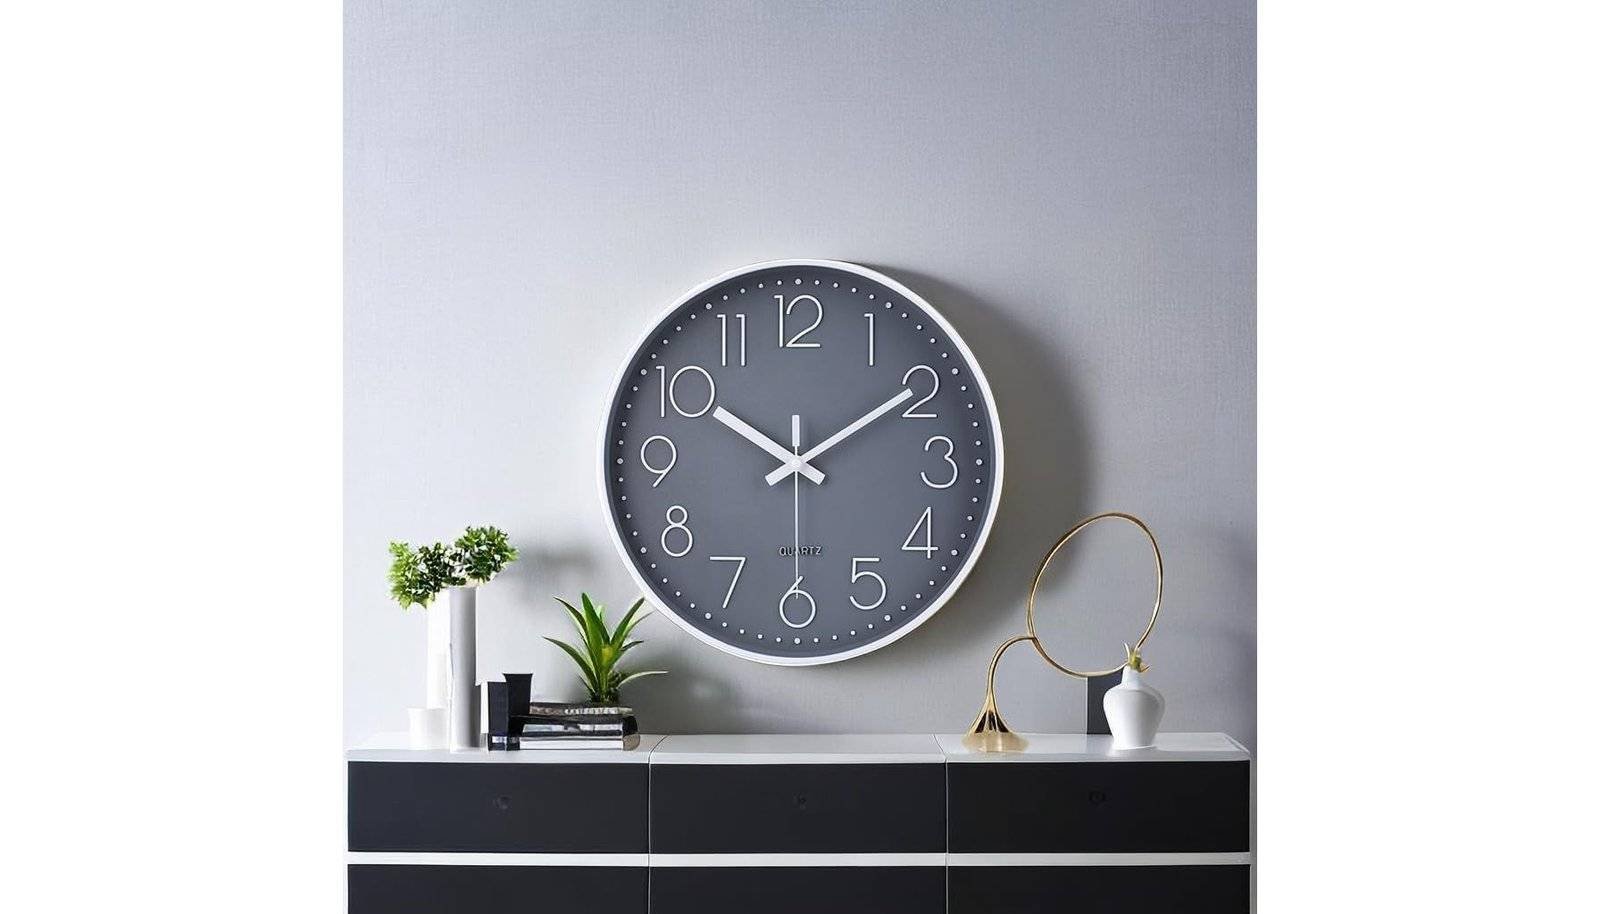 Jomparis 12 Inch Non-Ticking Wall Clock Review